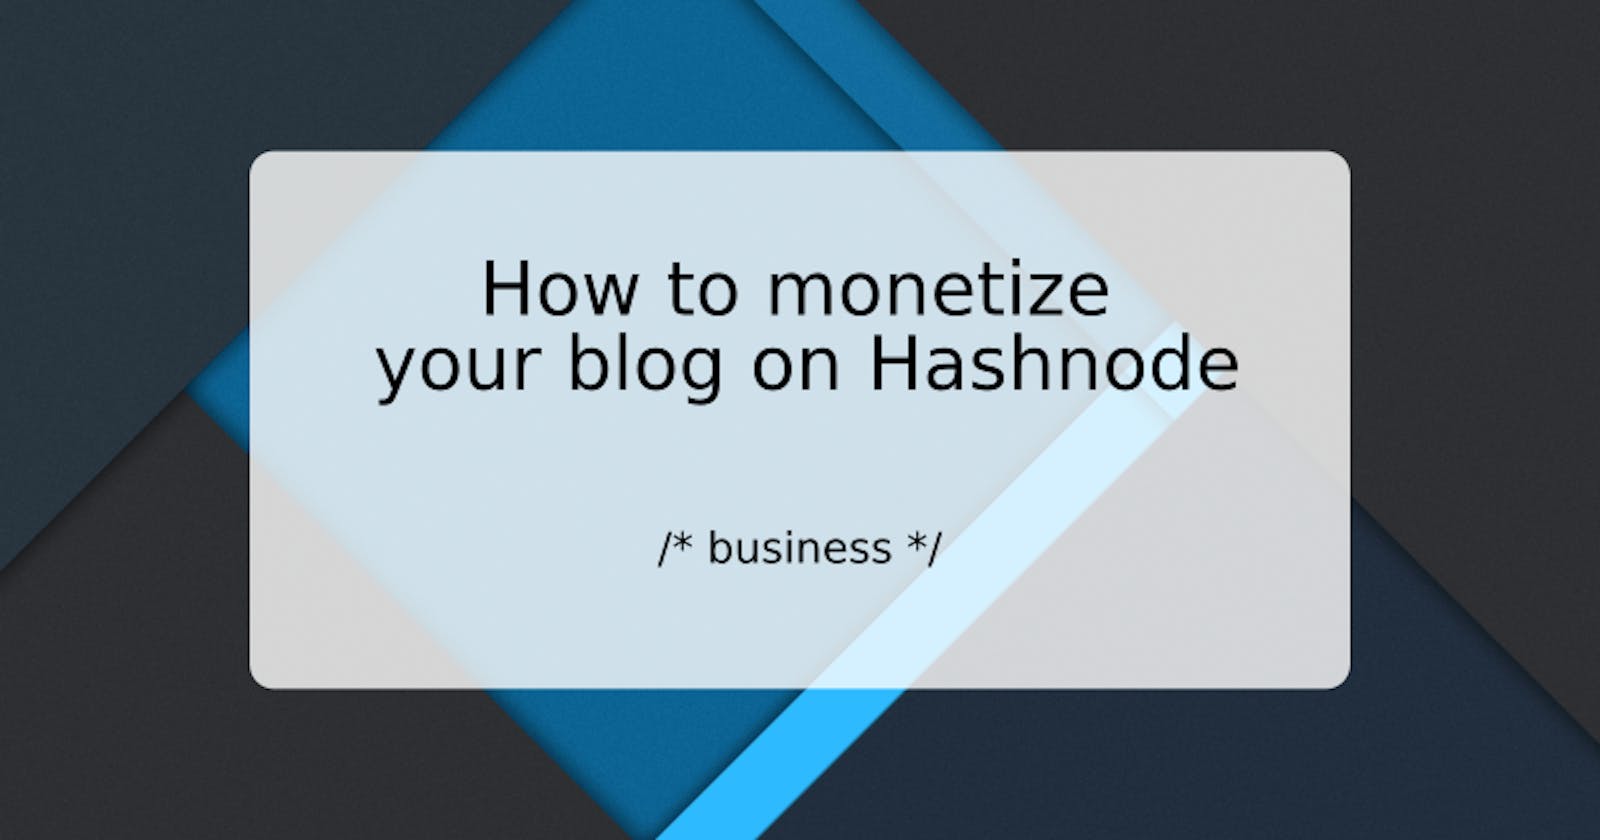 How to monetize your blog on Hashnode